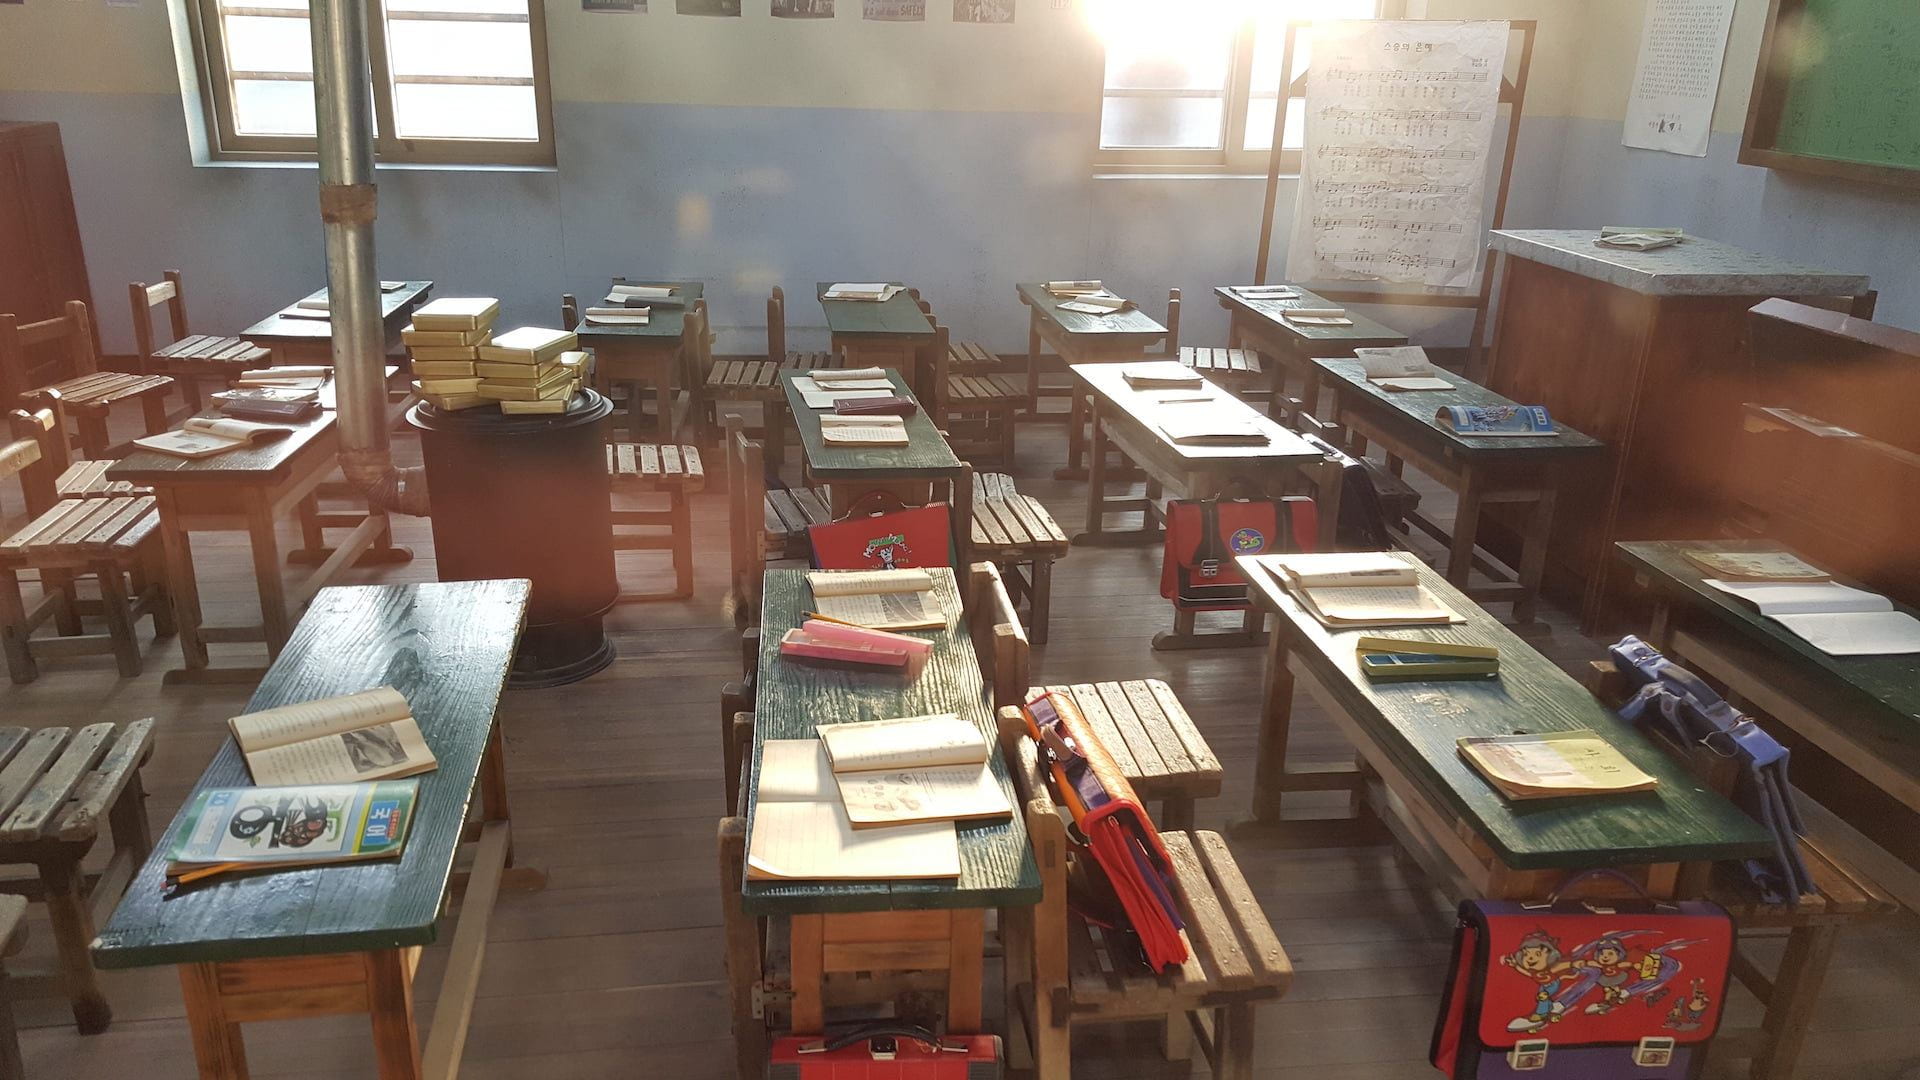 An elementary school classroom with tables and books